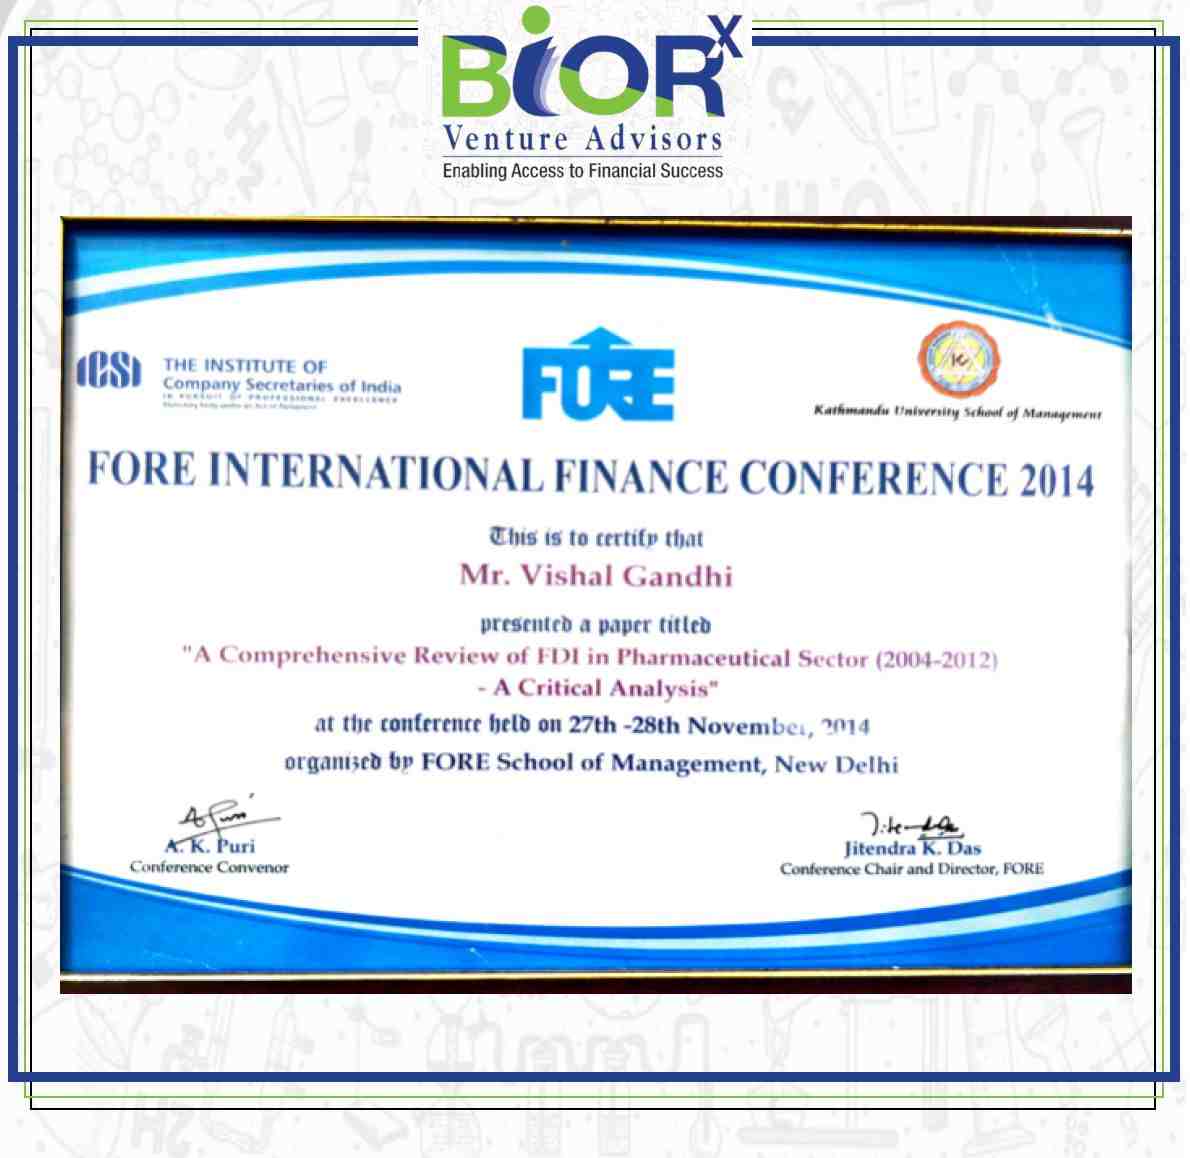 FORE International Finance Conference